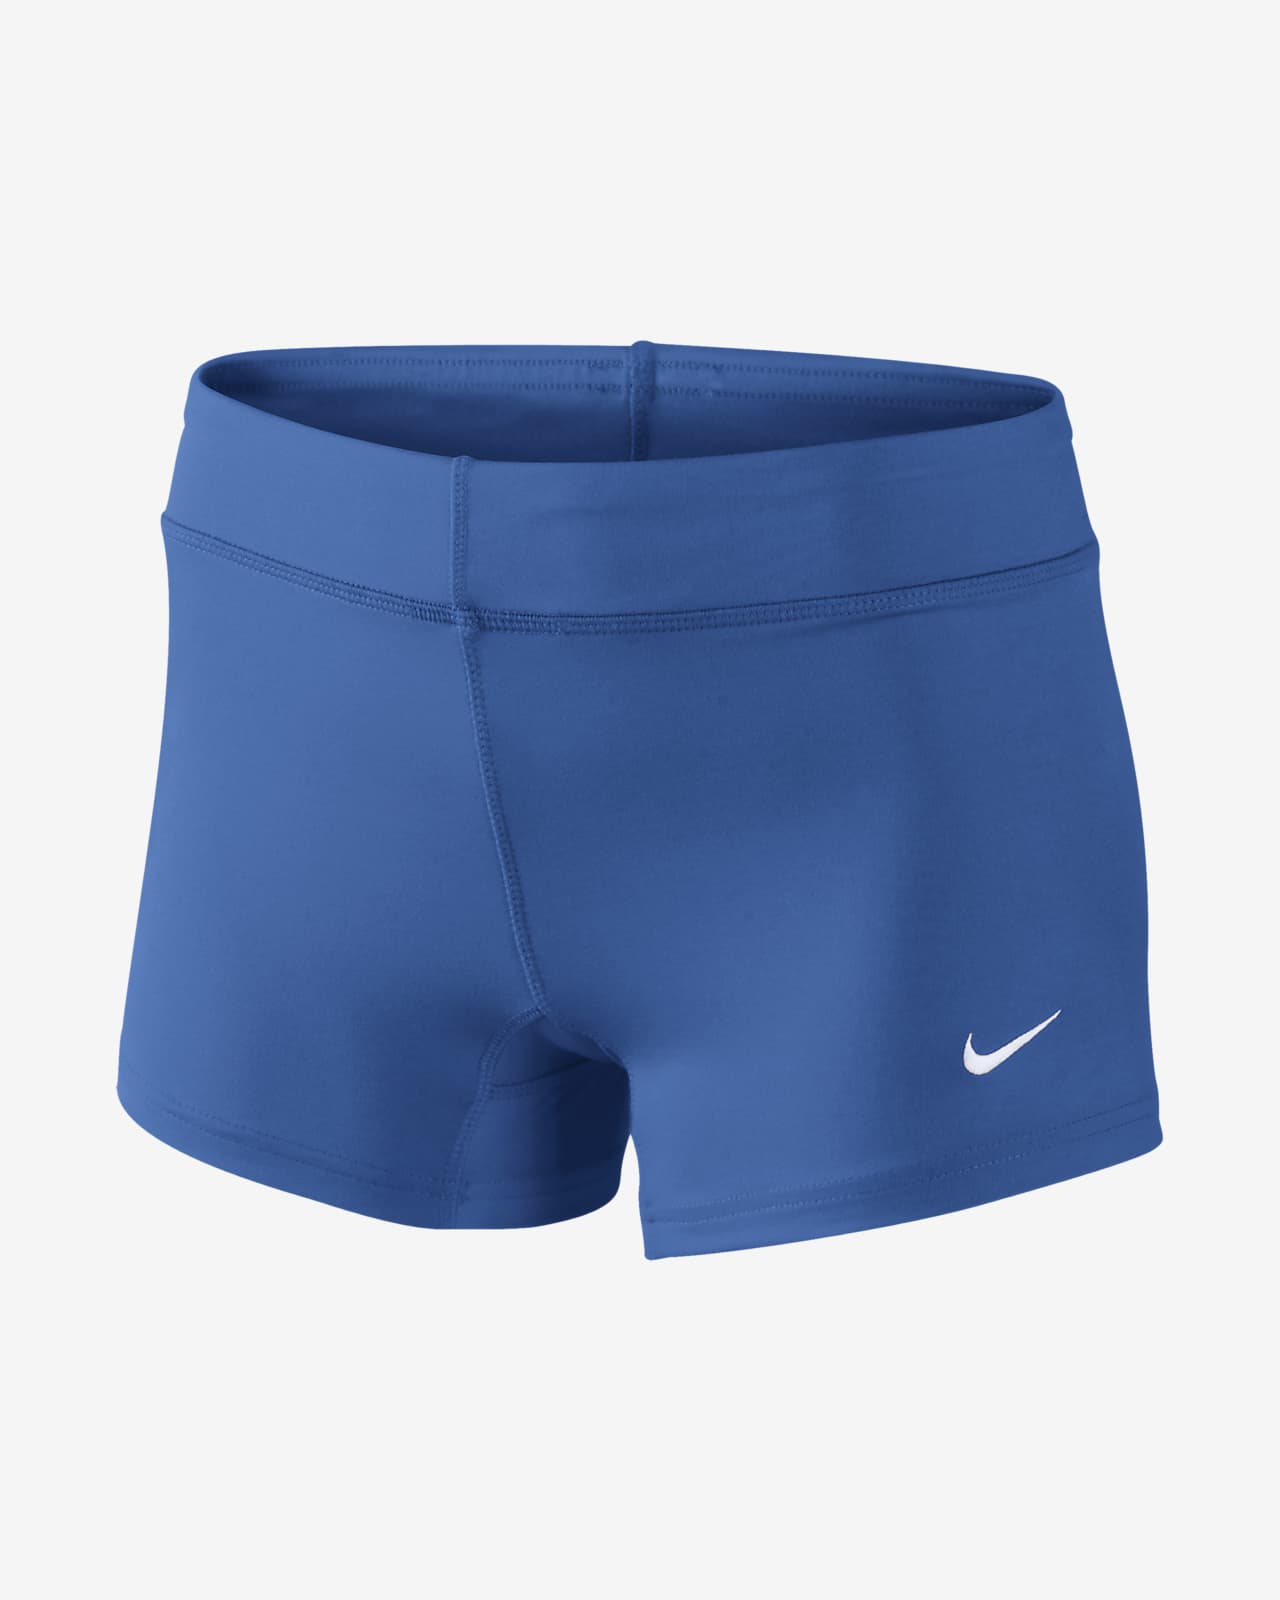 Nike Performance Women's Game Volleyball Shorts